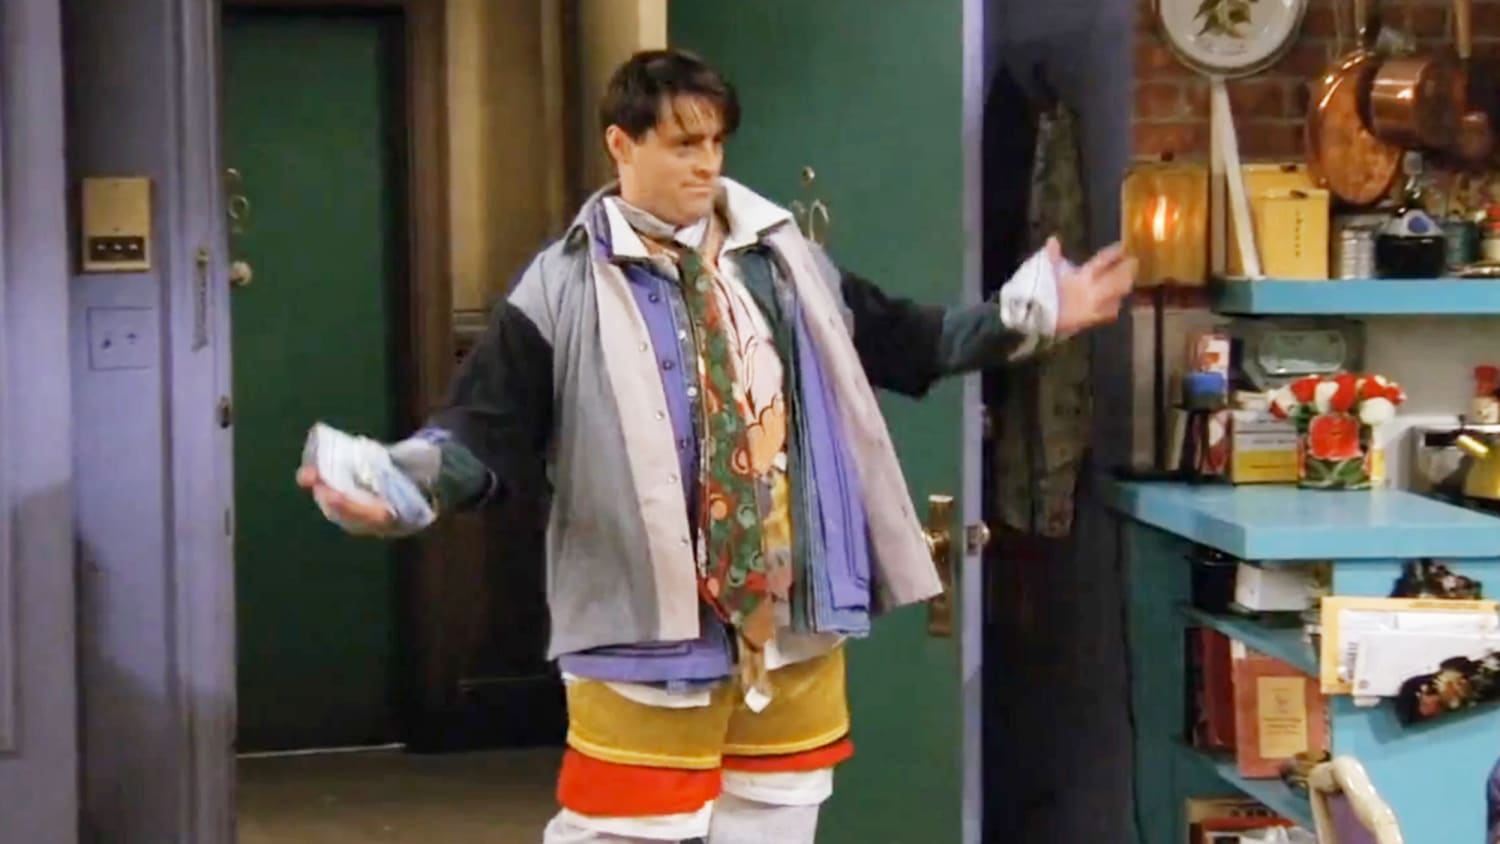 joey-chandler-clothes-today-160810-tease-02-1149886.jpg